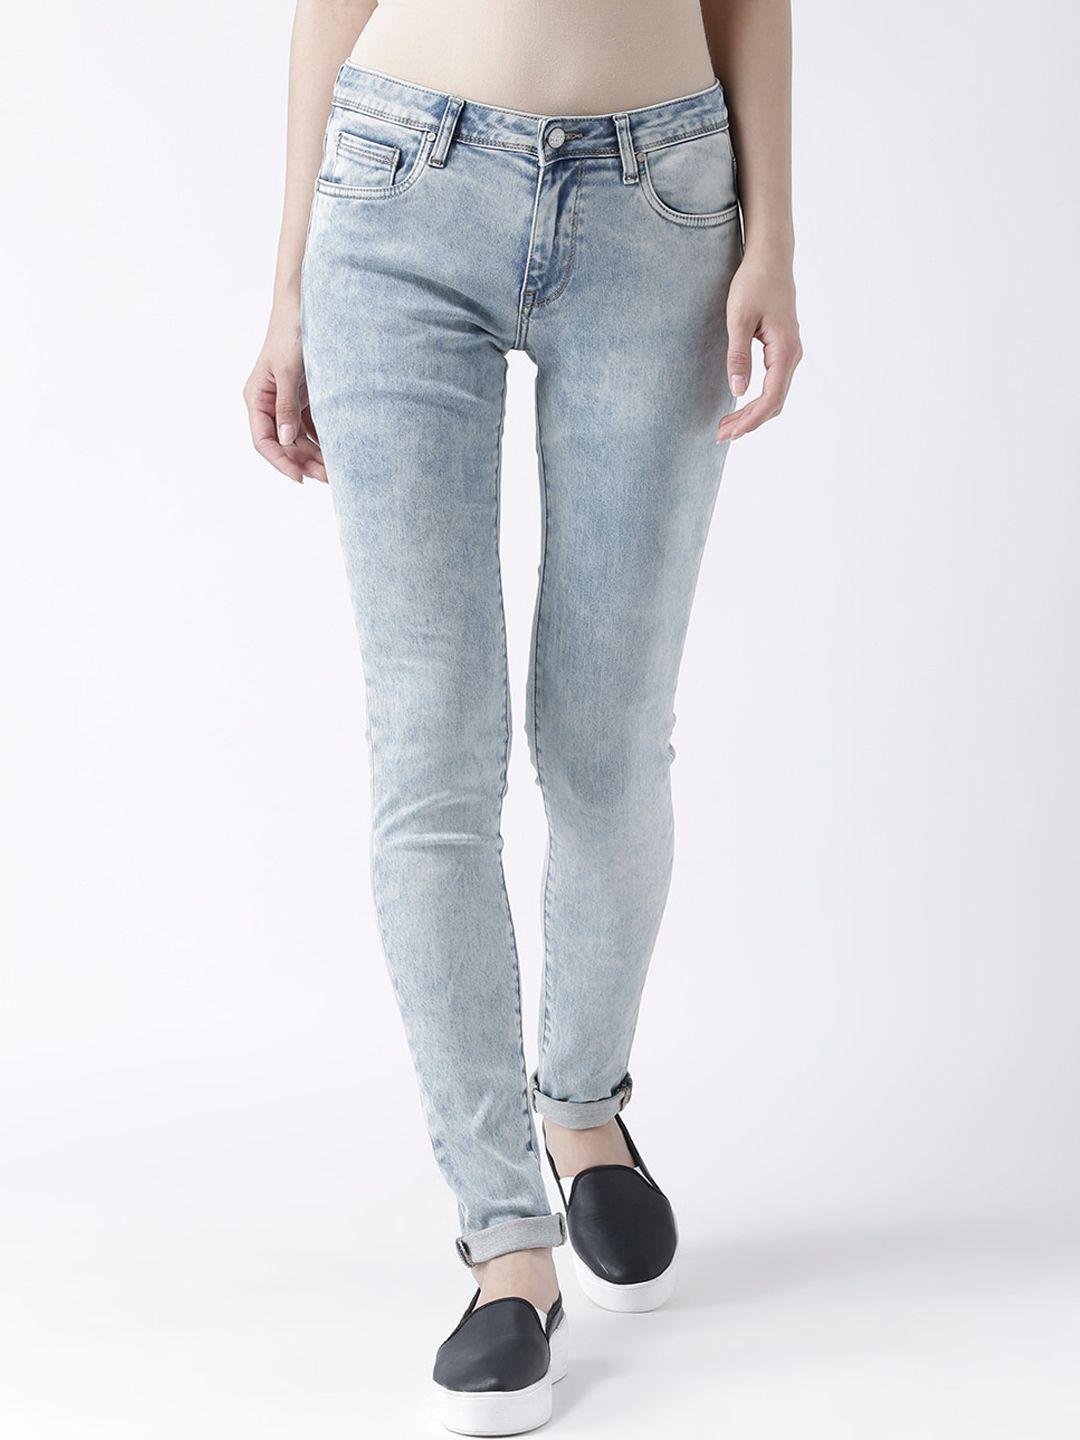 fusion-beats-women-clean-look-heavy-fade-mid-rise-cotton-jeans